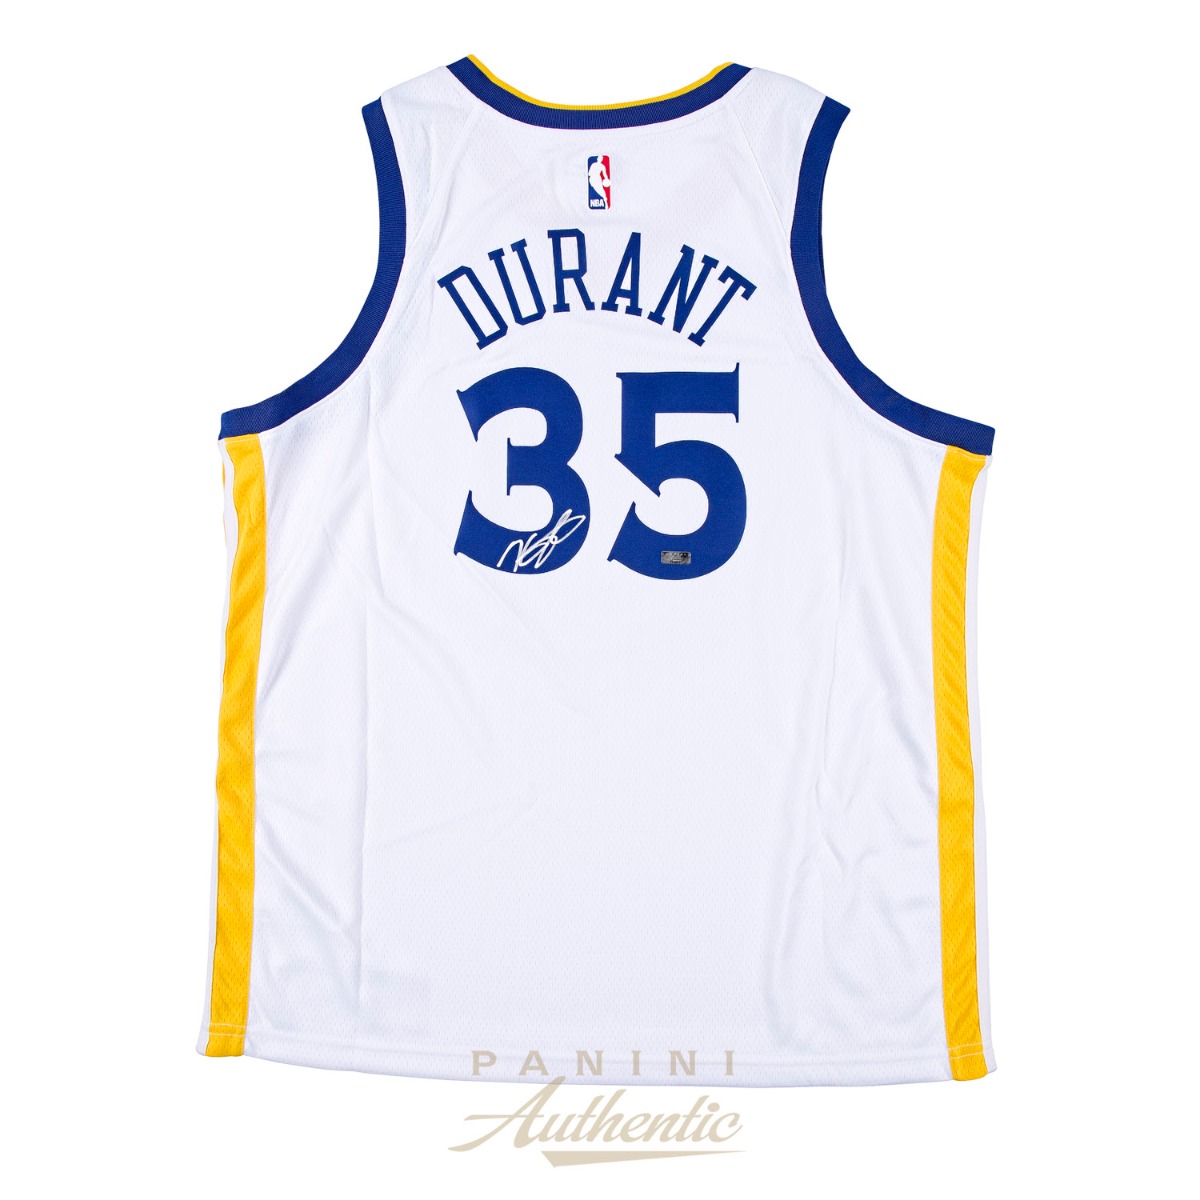 kevin durant white jersey